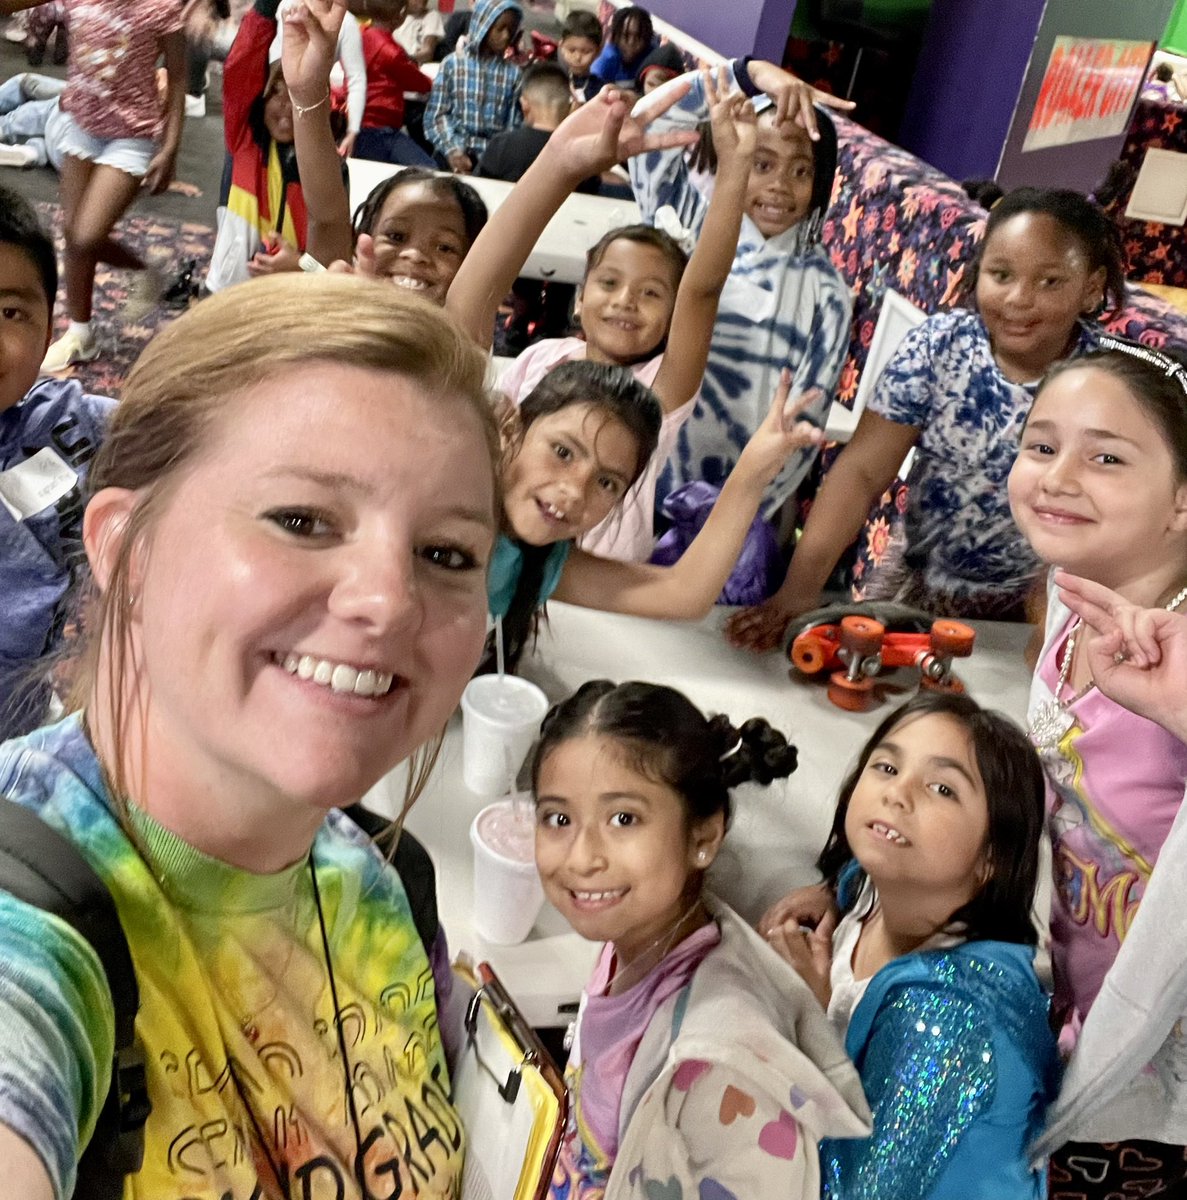 2nd Grade had a great time at our Panther Power Party at Roller City today!! So fun celebrating all of the amazing Citizenship we have shown all year long! 💙🎉 #10MoreWakeups #WeAreWayne #PantherProud